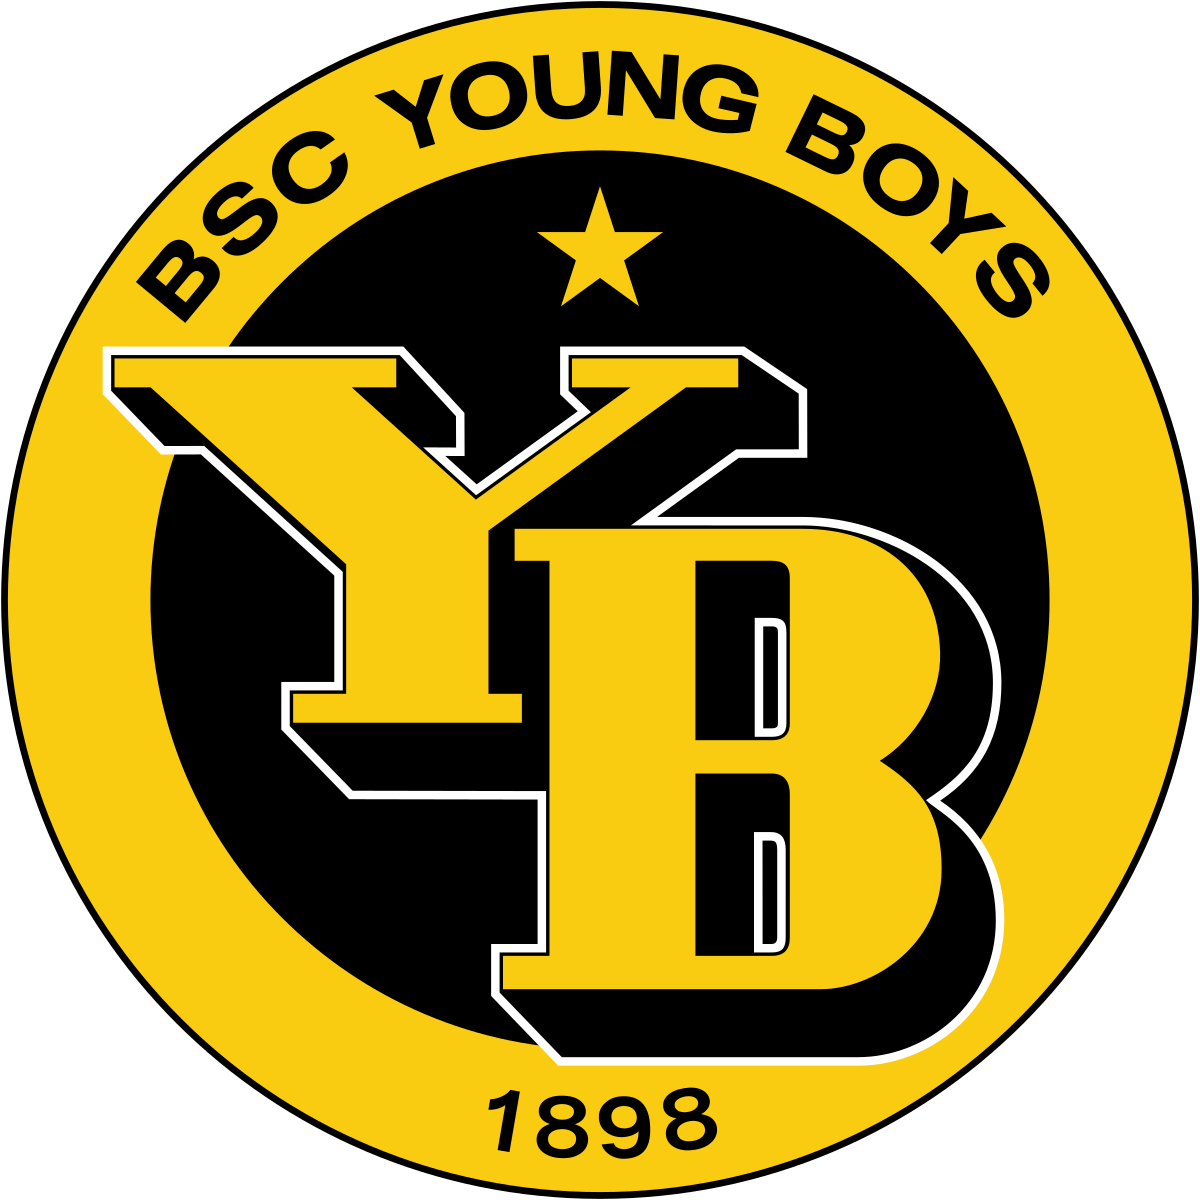 bsc young boys bern photo: bs